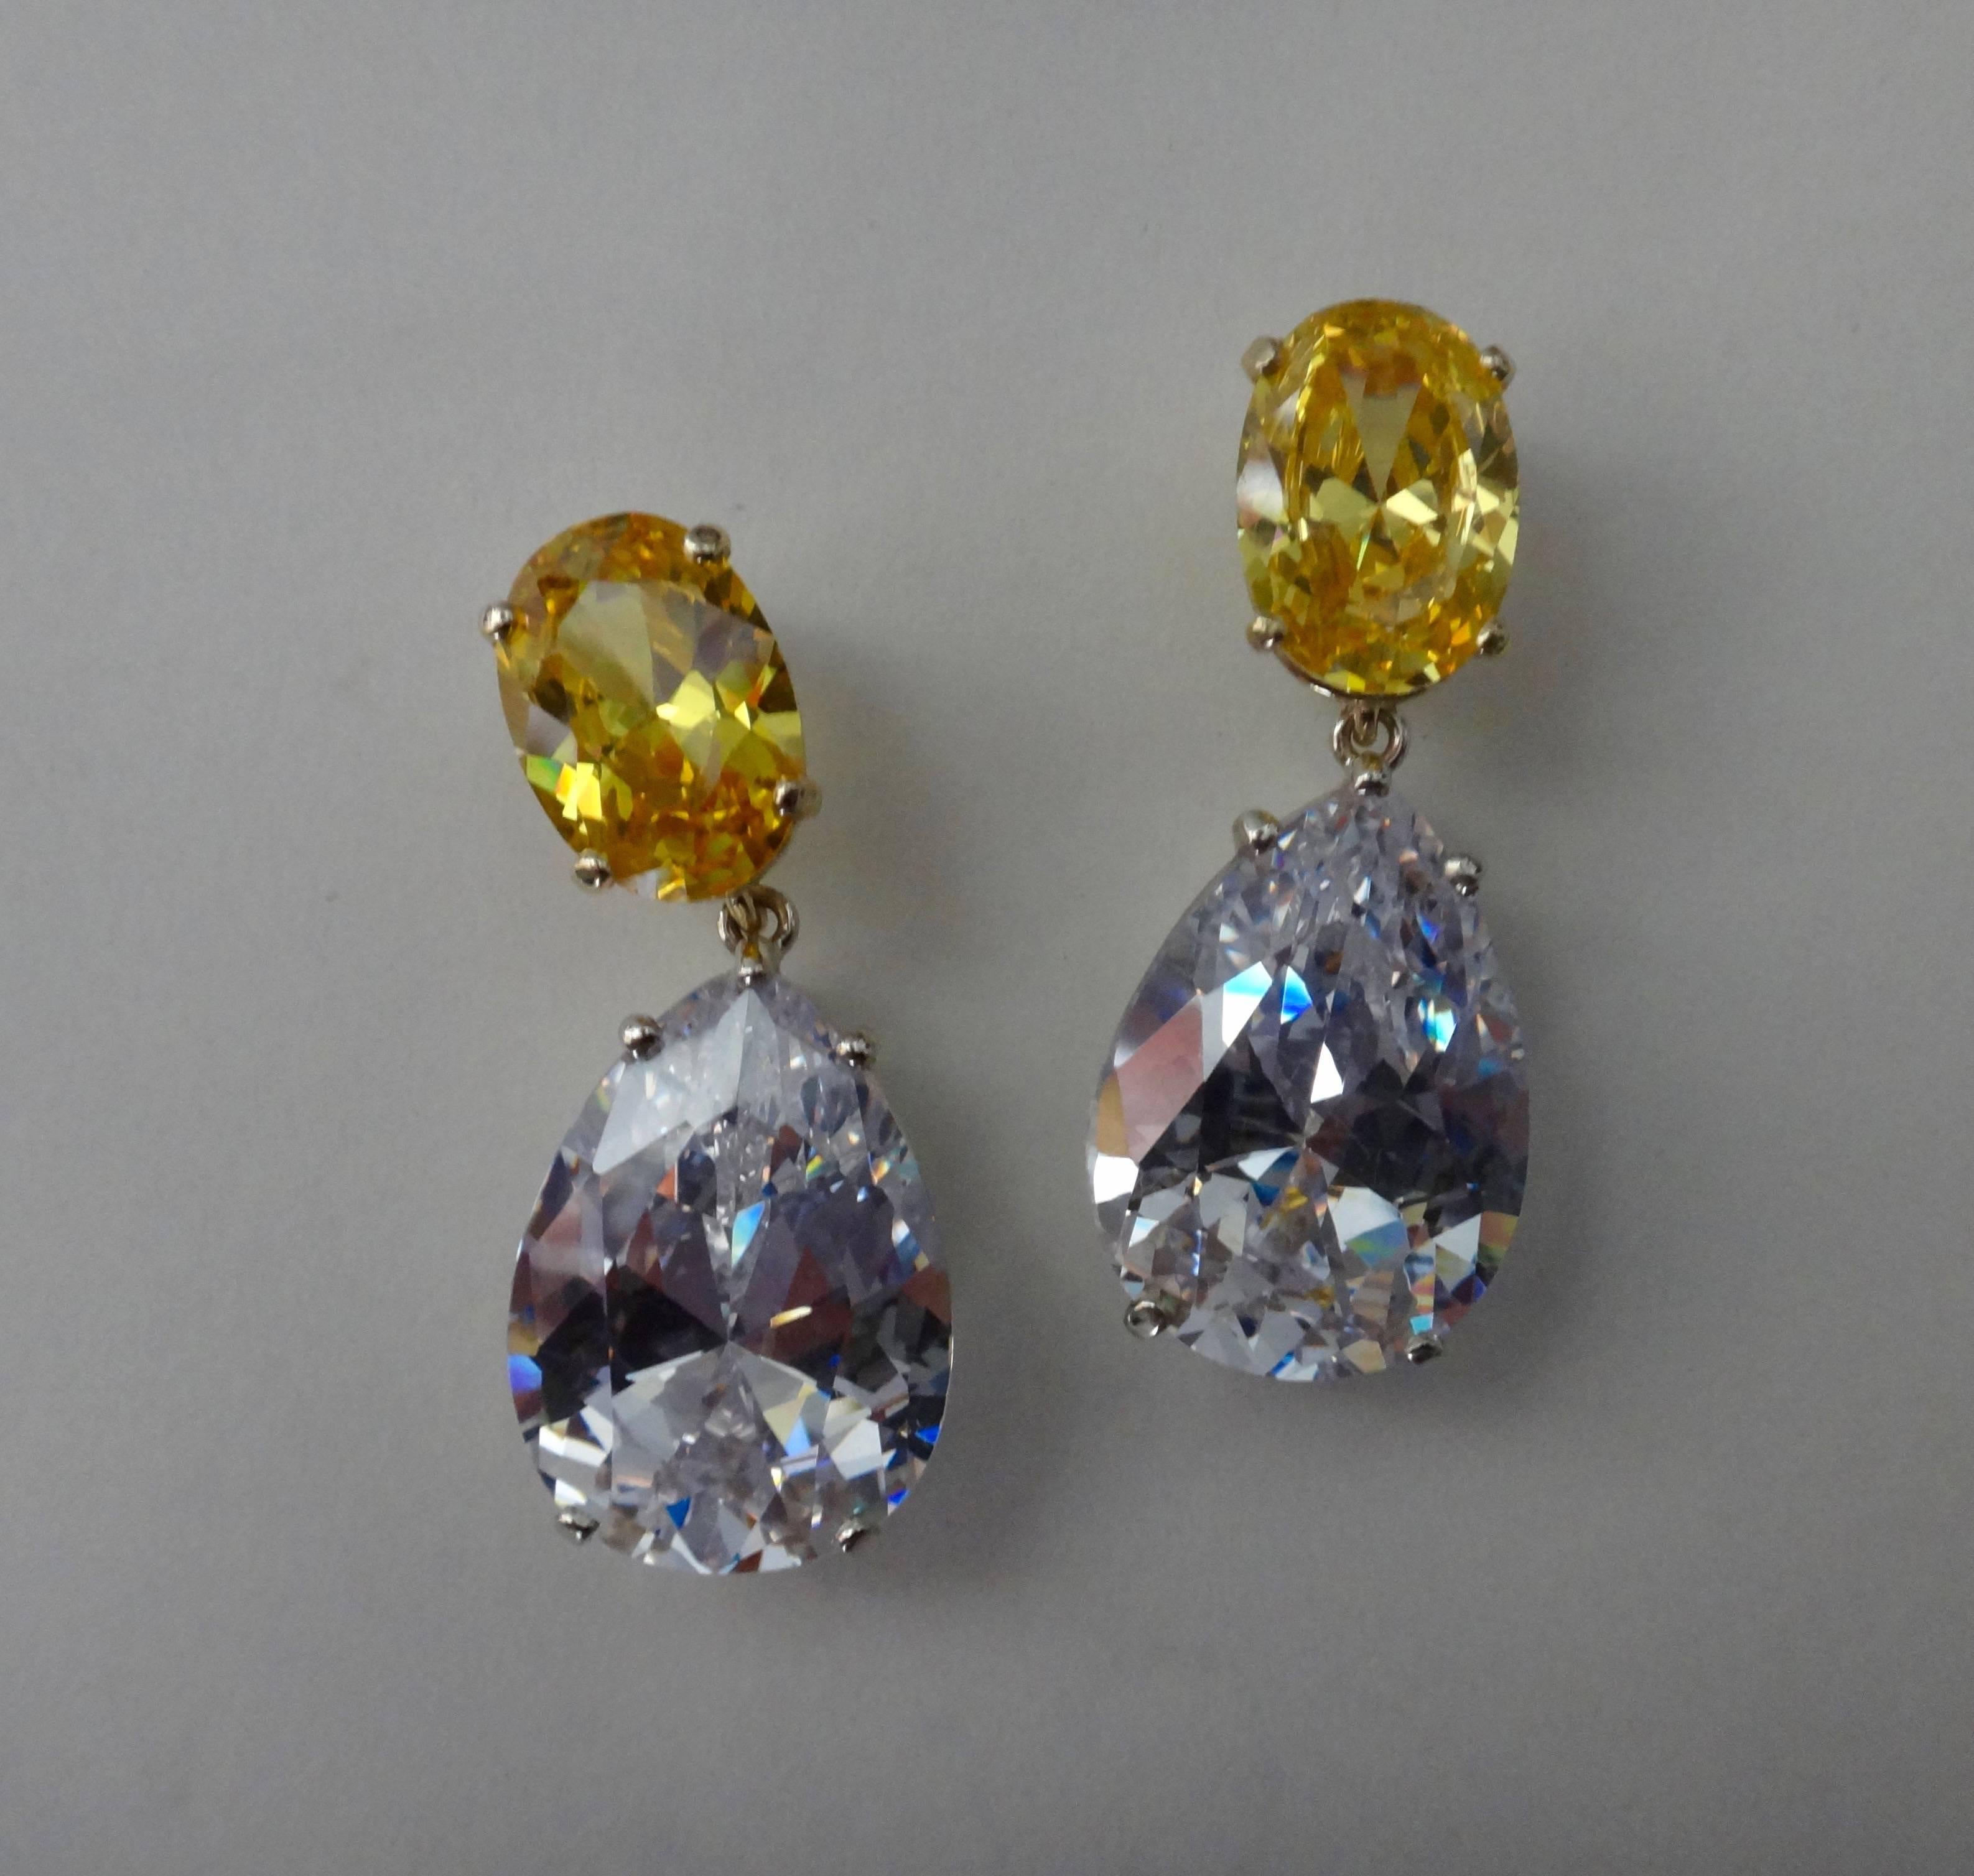 Exceptionally well cut oval golden zircons (Origin: Myanmar) are paired with equally well cut, pear shaped platinum topaz (Origin: Brazil) in these dramatic, sparkling drop earrings.  Zircons come in many colors including blue, green, brownish red,